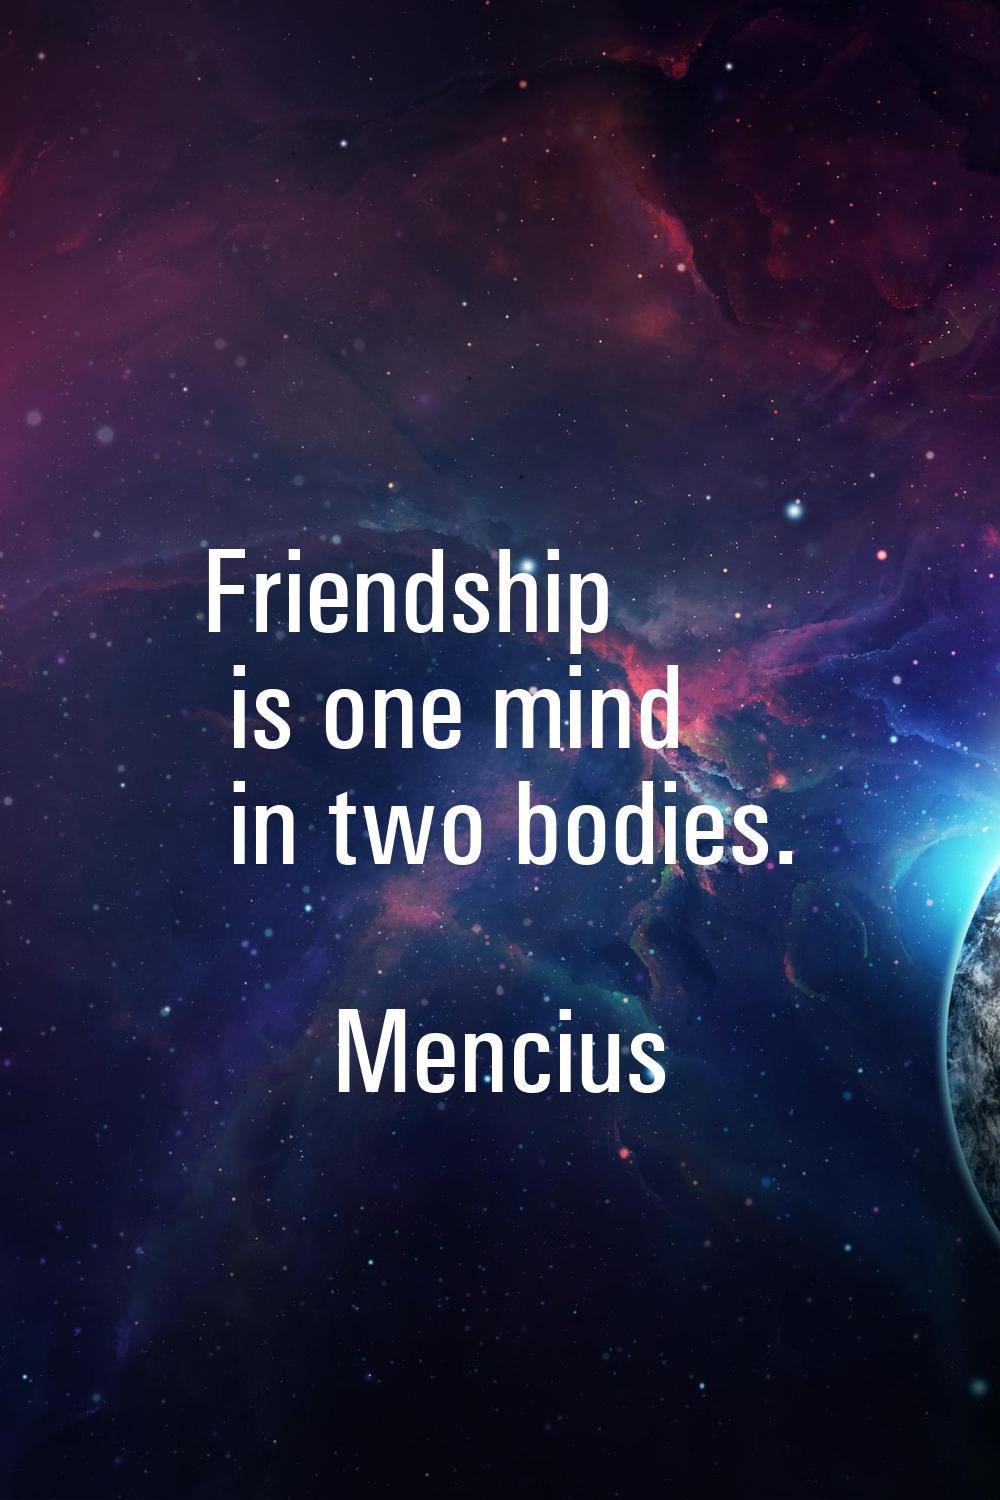 Friendship is one mind in two bodies.